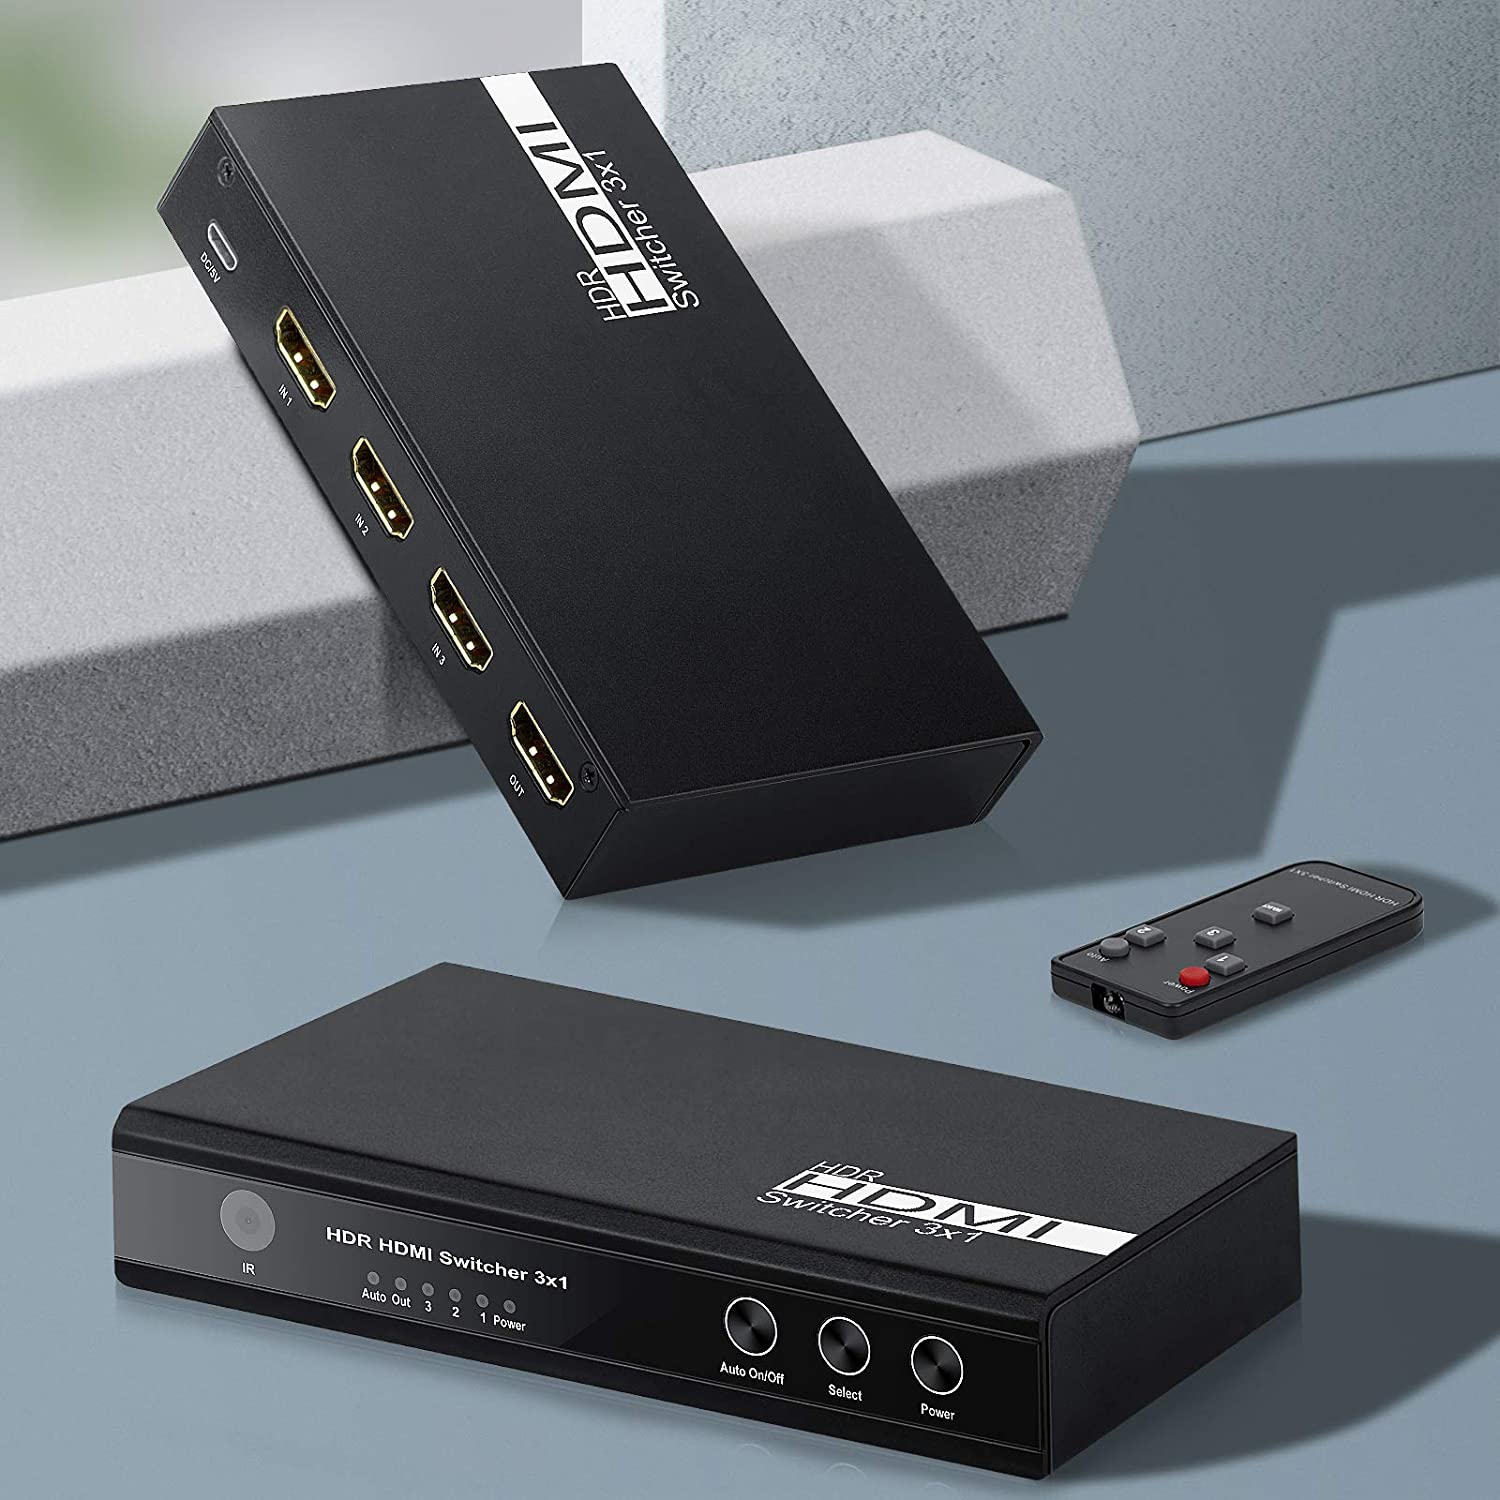 3 Port HDR HDMI Switcher User Manual